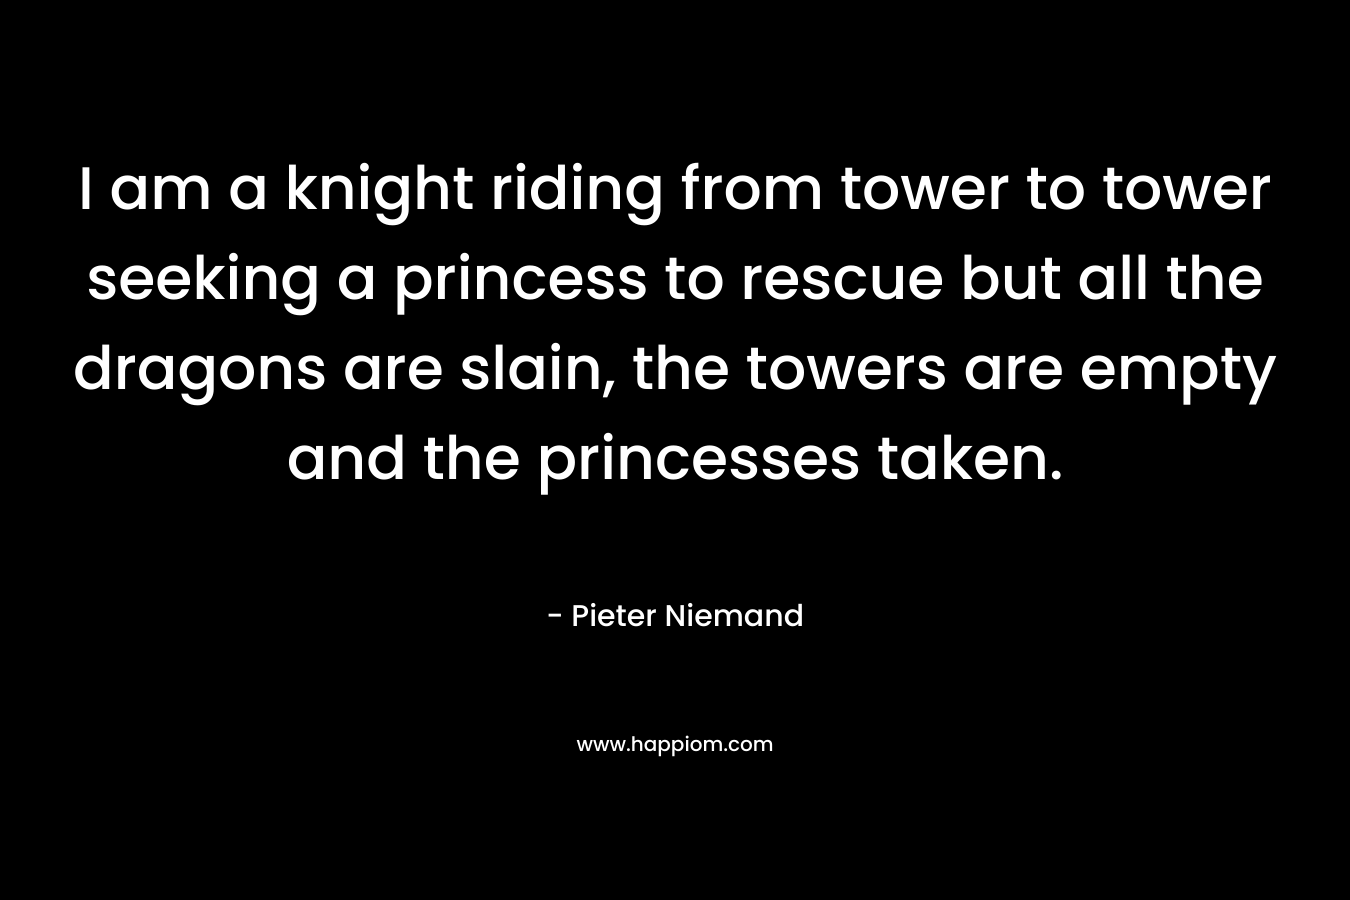 I am a knight riding from tower to tower seeking a princess to rescue but all the dragons are slain, the towers are empty and the princesses taken. – Pieter Niemand